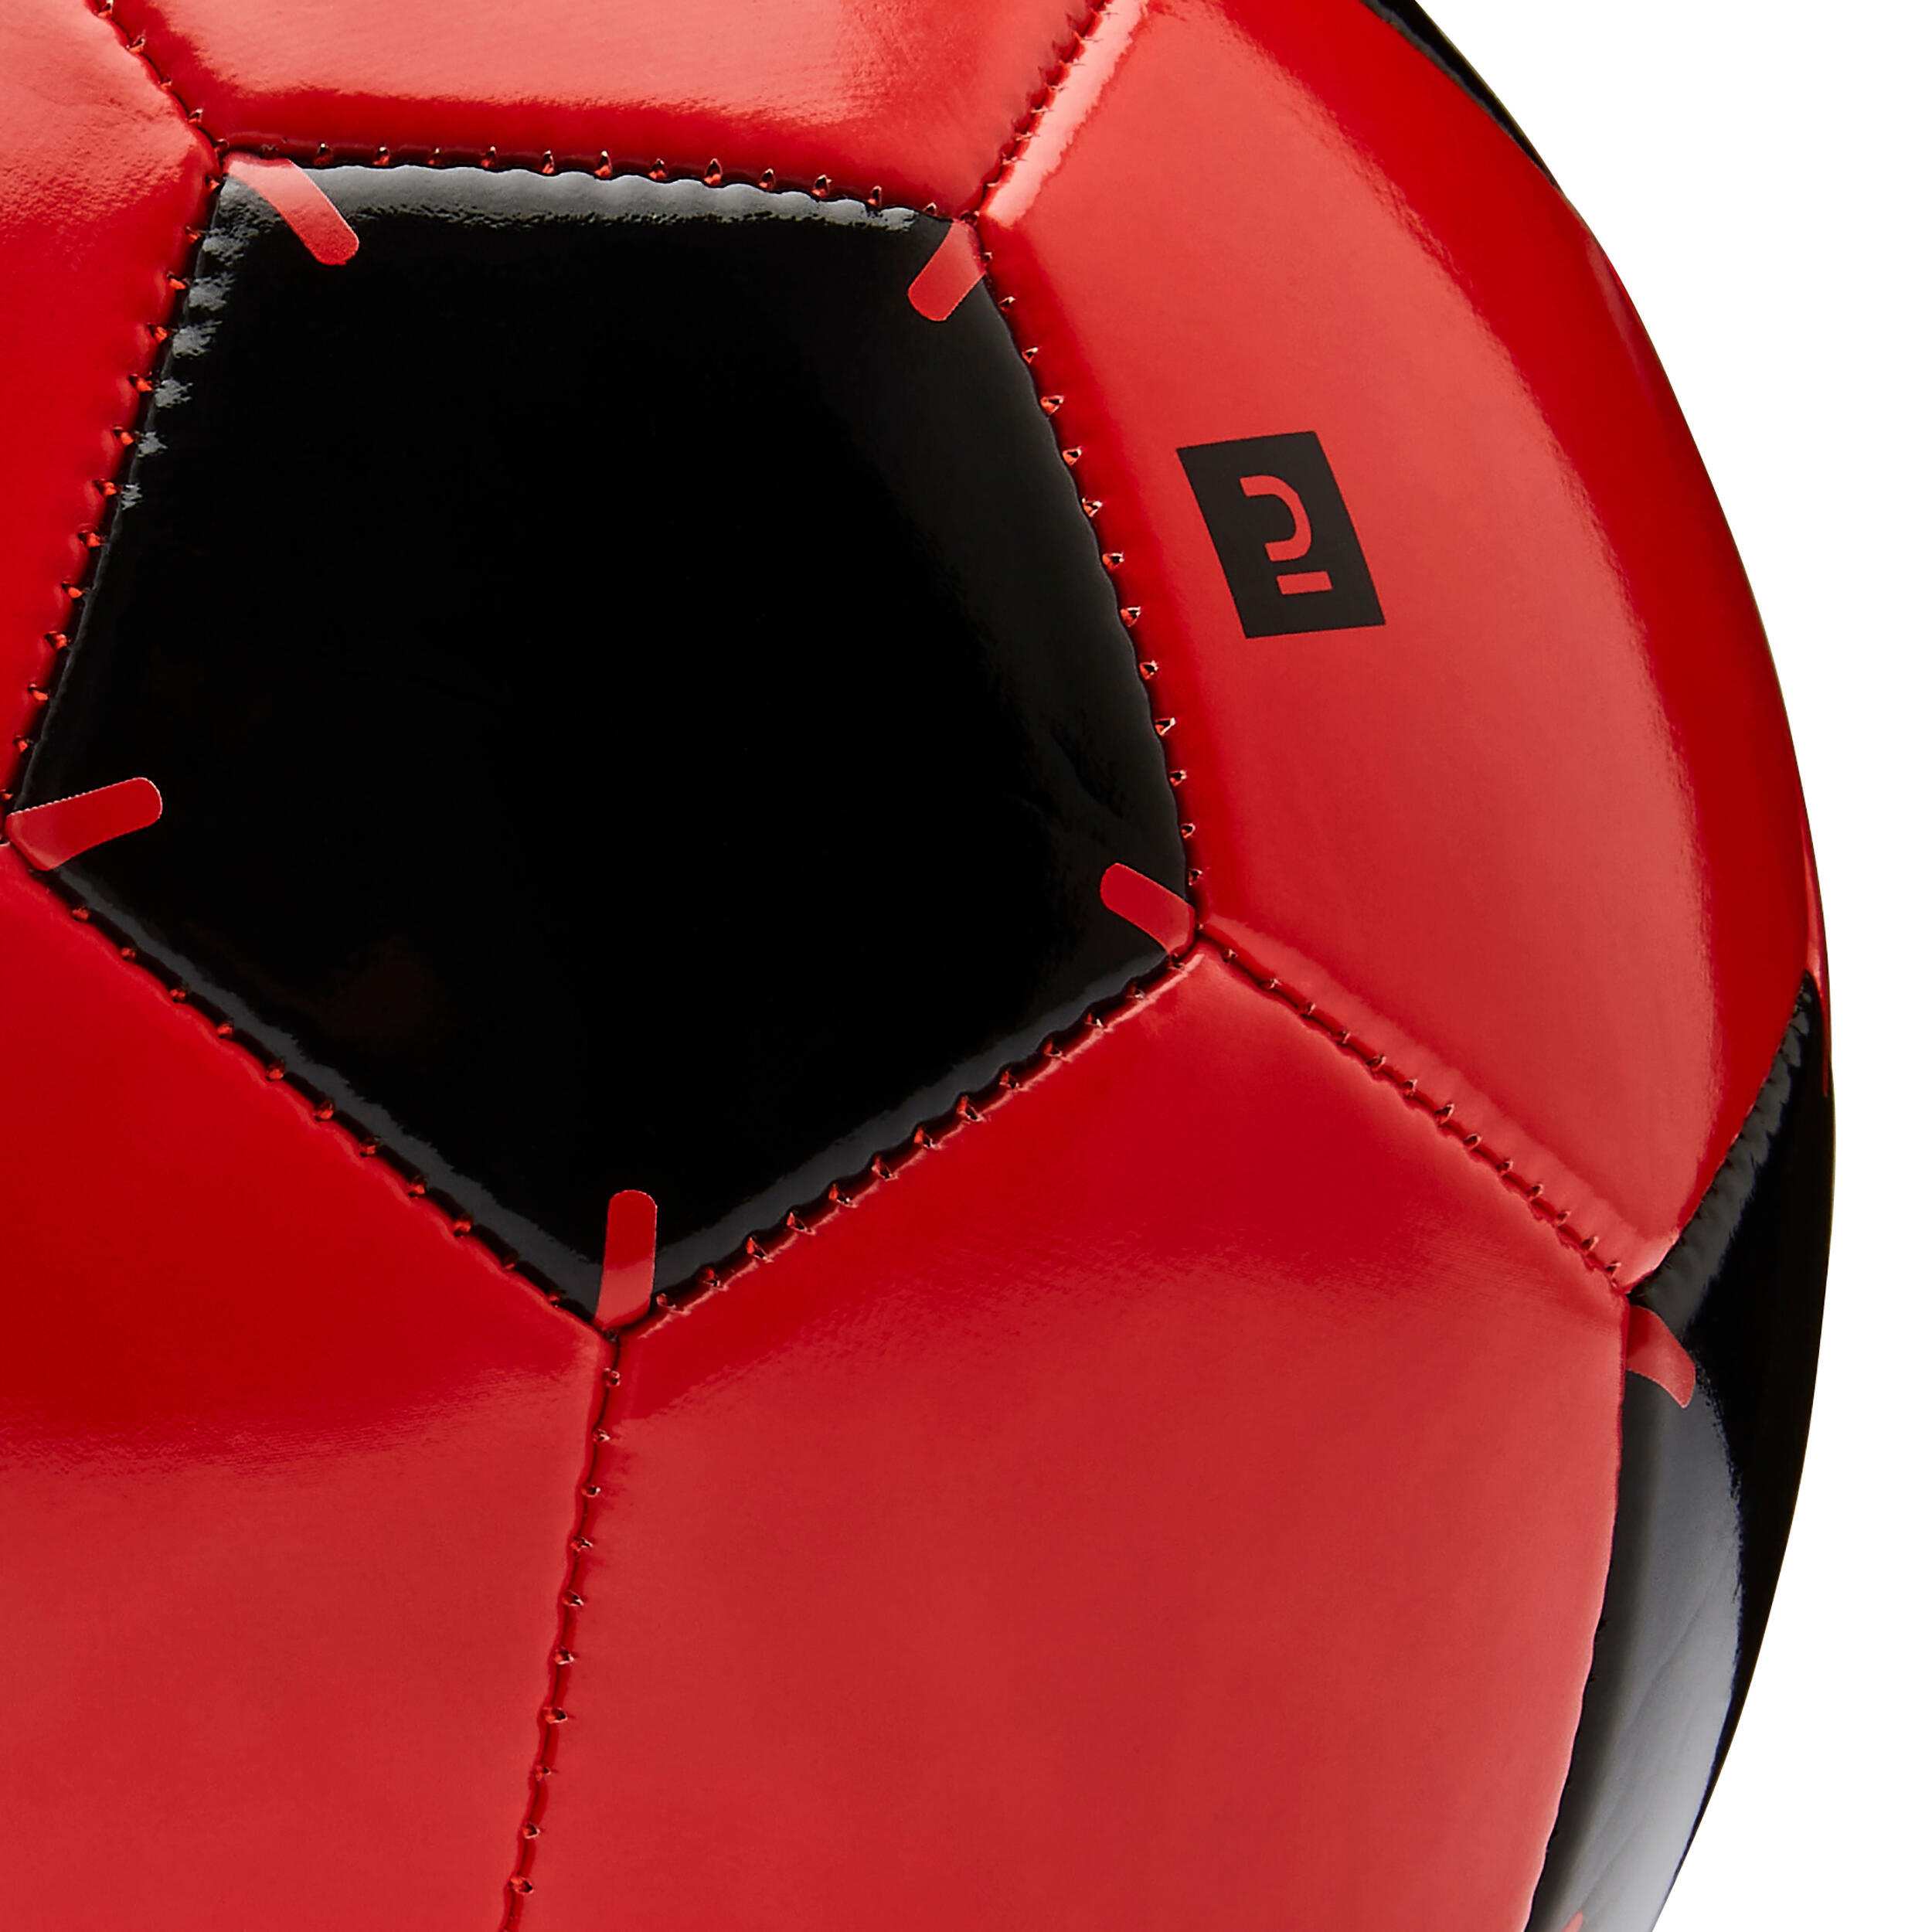 Kids' size 4 football, red 5/7